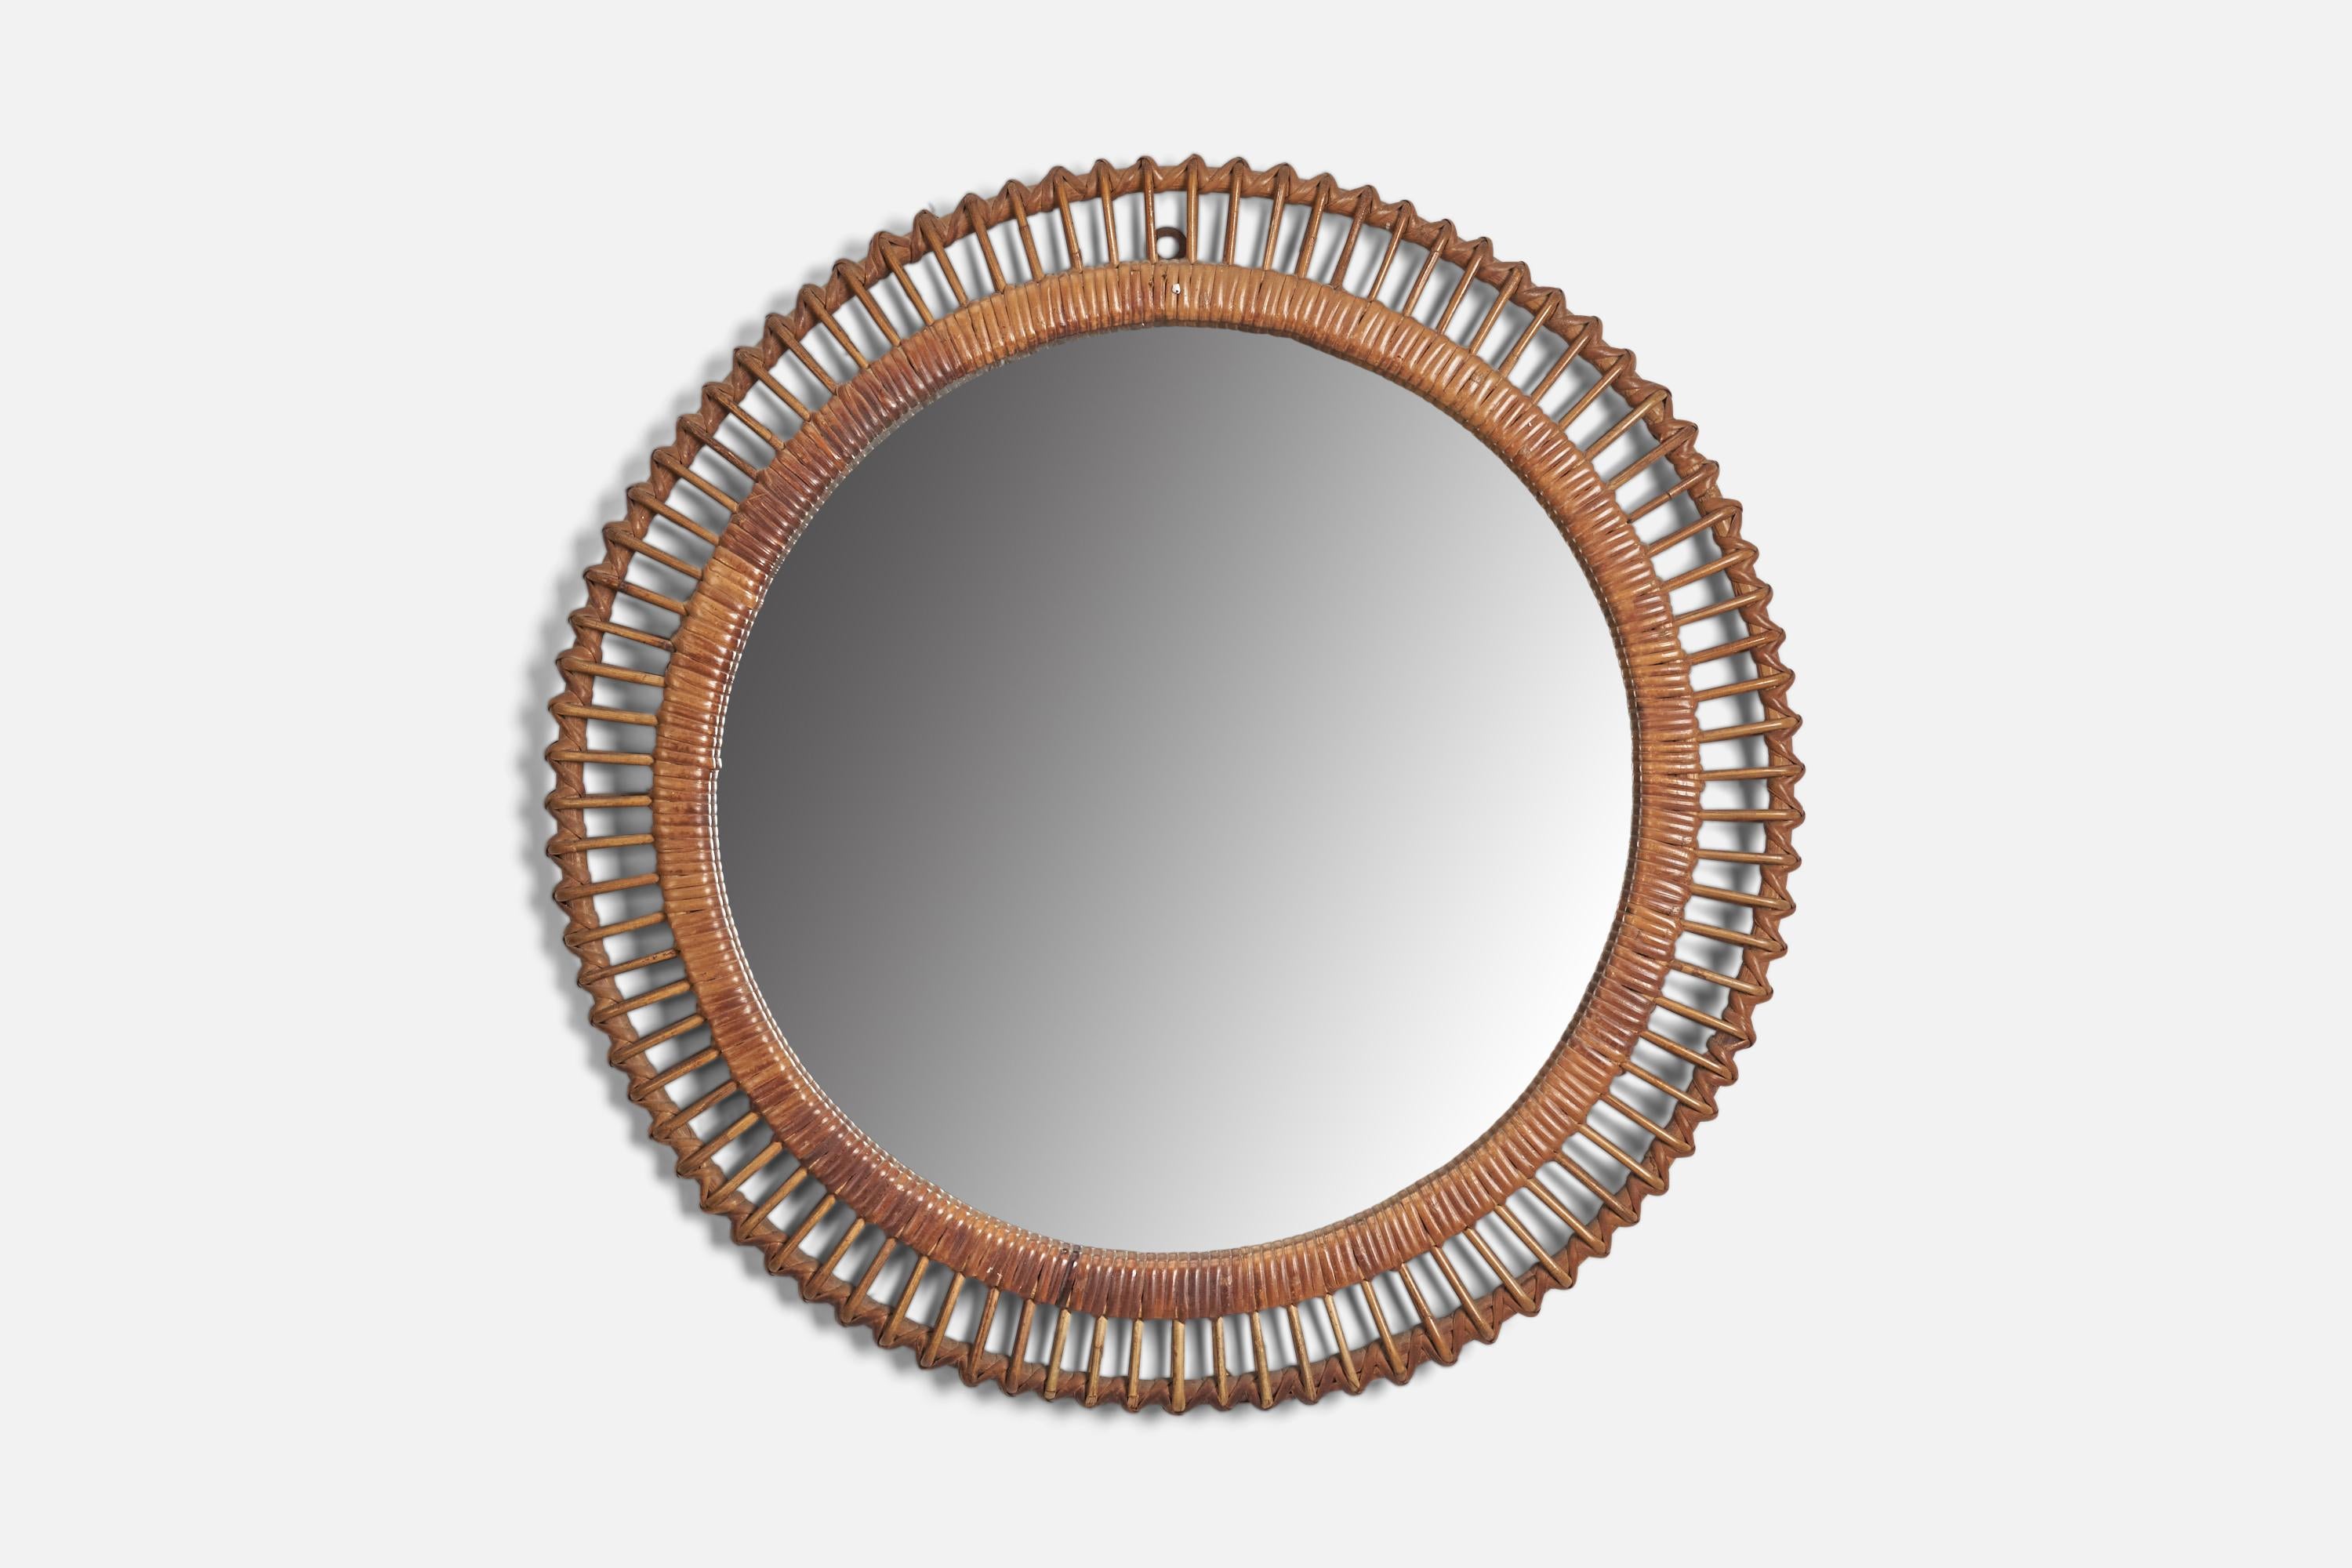 A rattan and bamboo wall mirror designed and produced by an Italian Designer, Italy, 1960s.